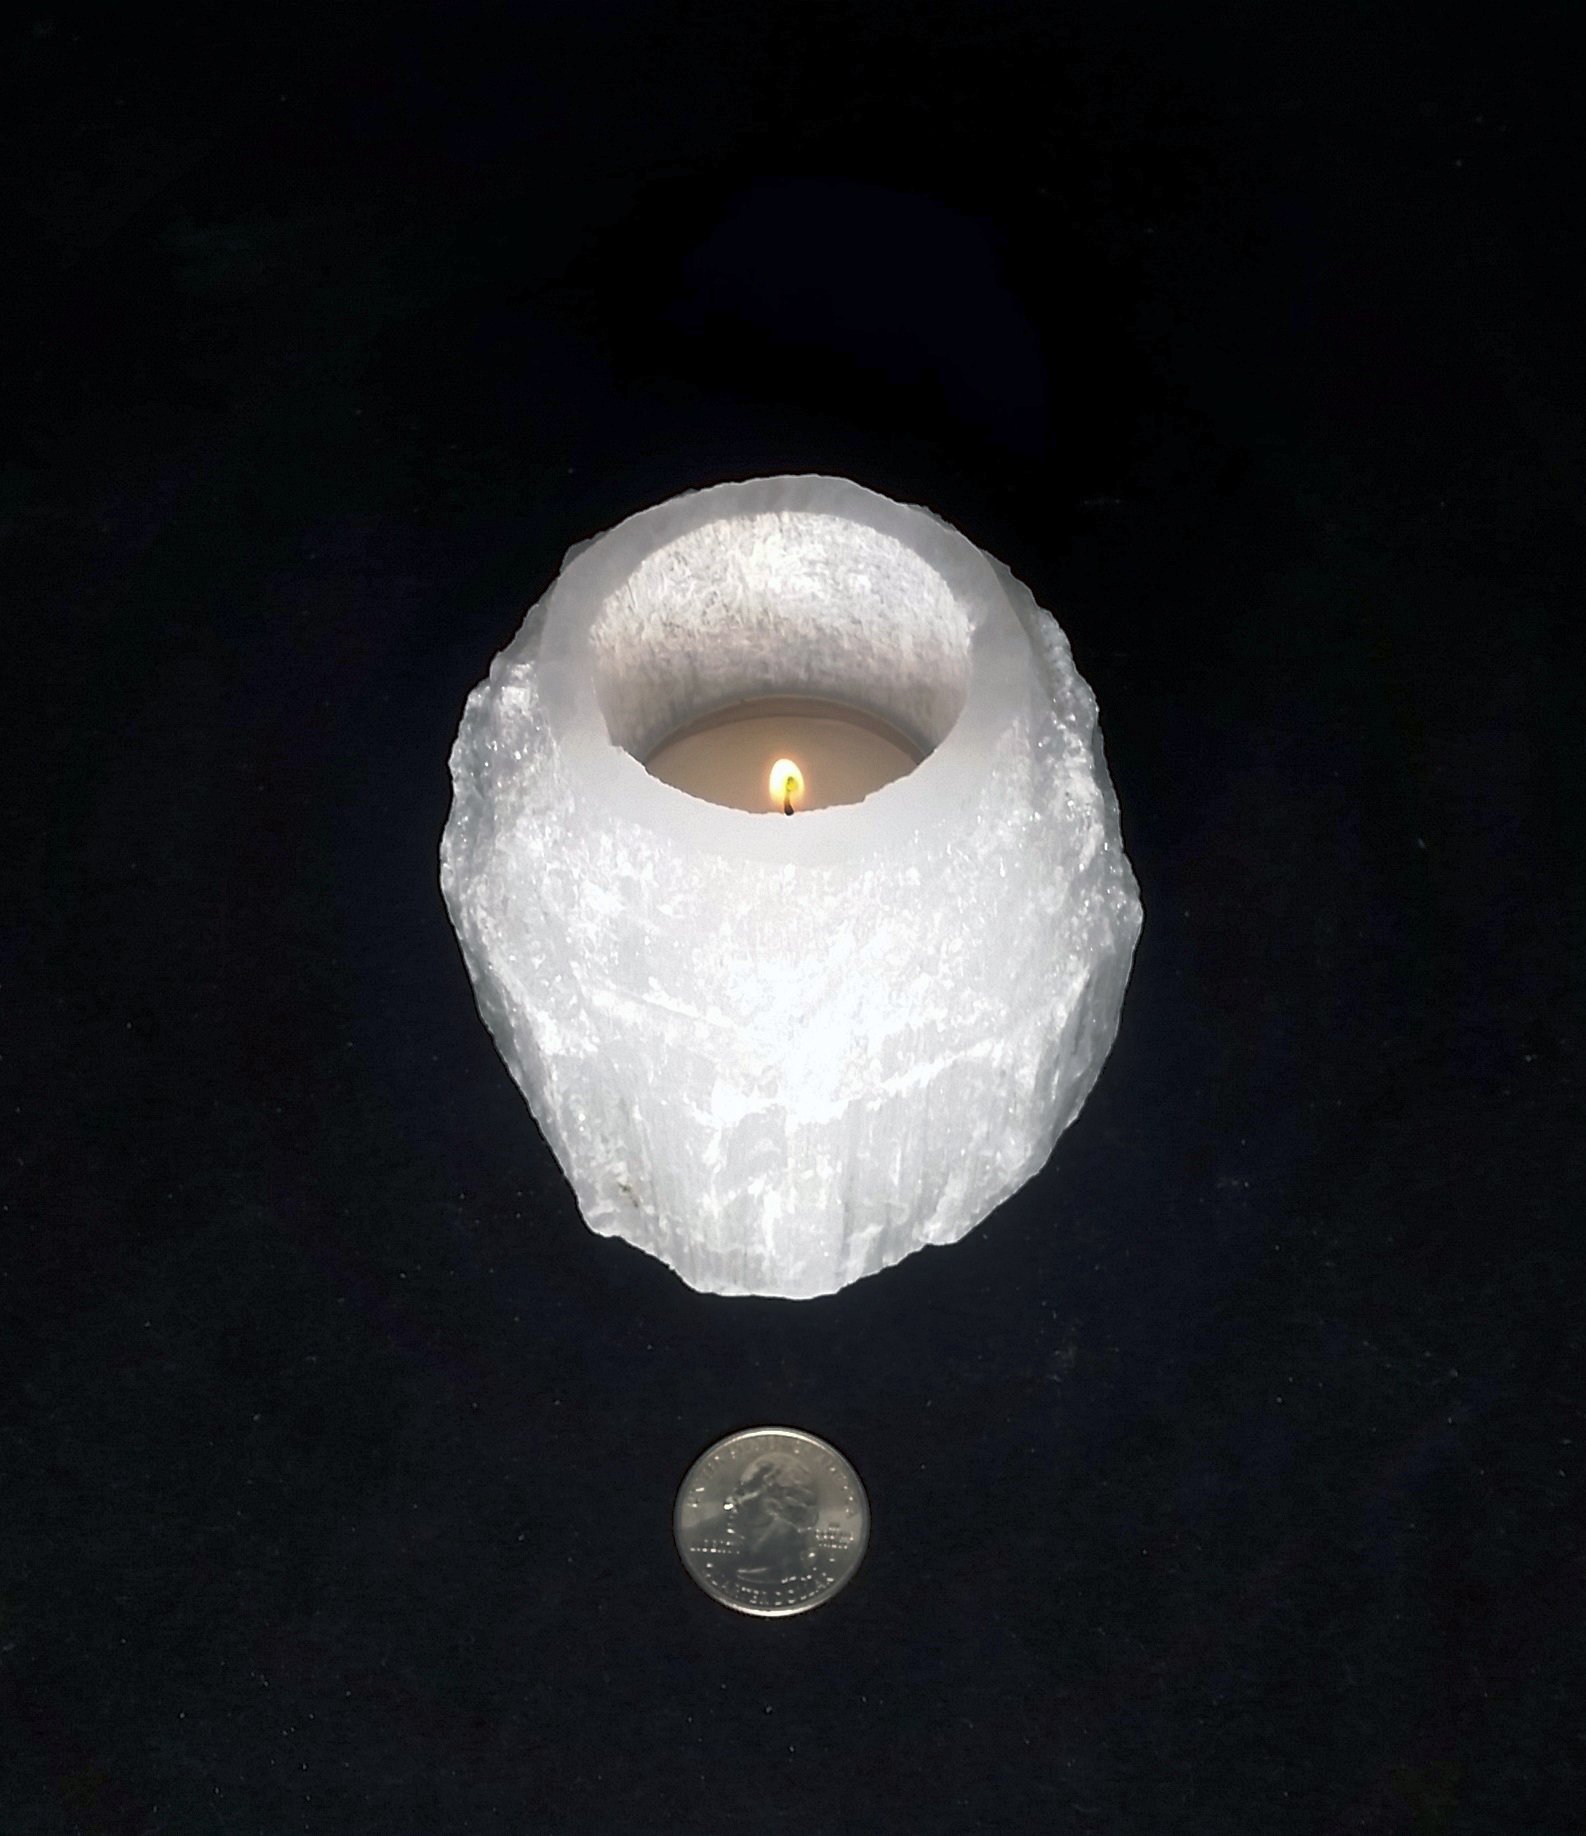 An amazing stone of cleansing and clearing, Selenite naturally dispels negative energy, removes energy blocks, and charges and amplifies other stones. Never needing clearing of its own, it is a must-have in your home.   These glowing and gorgeous Selenite candleholders will supercharge and cleanse you and your home with color, light, and high vibrations.